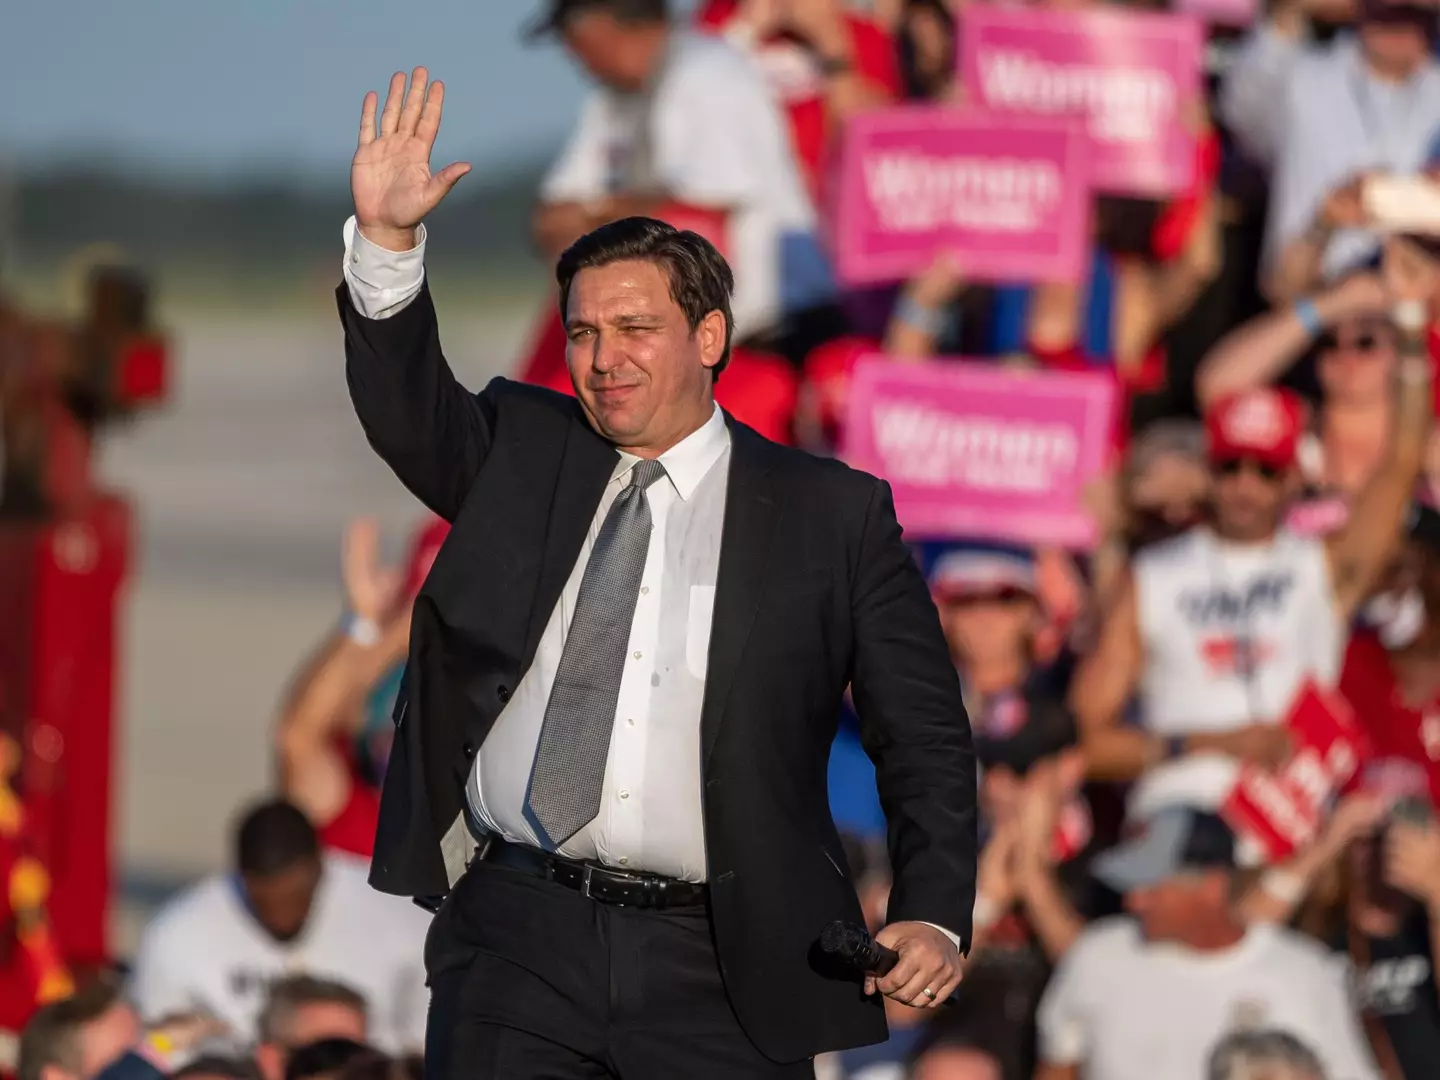 Ron deSantis has emerged as a possible contender for the 2024 Republican nomination.